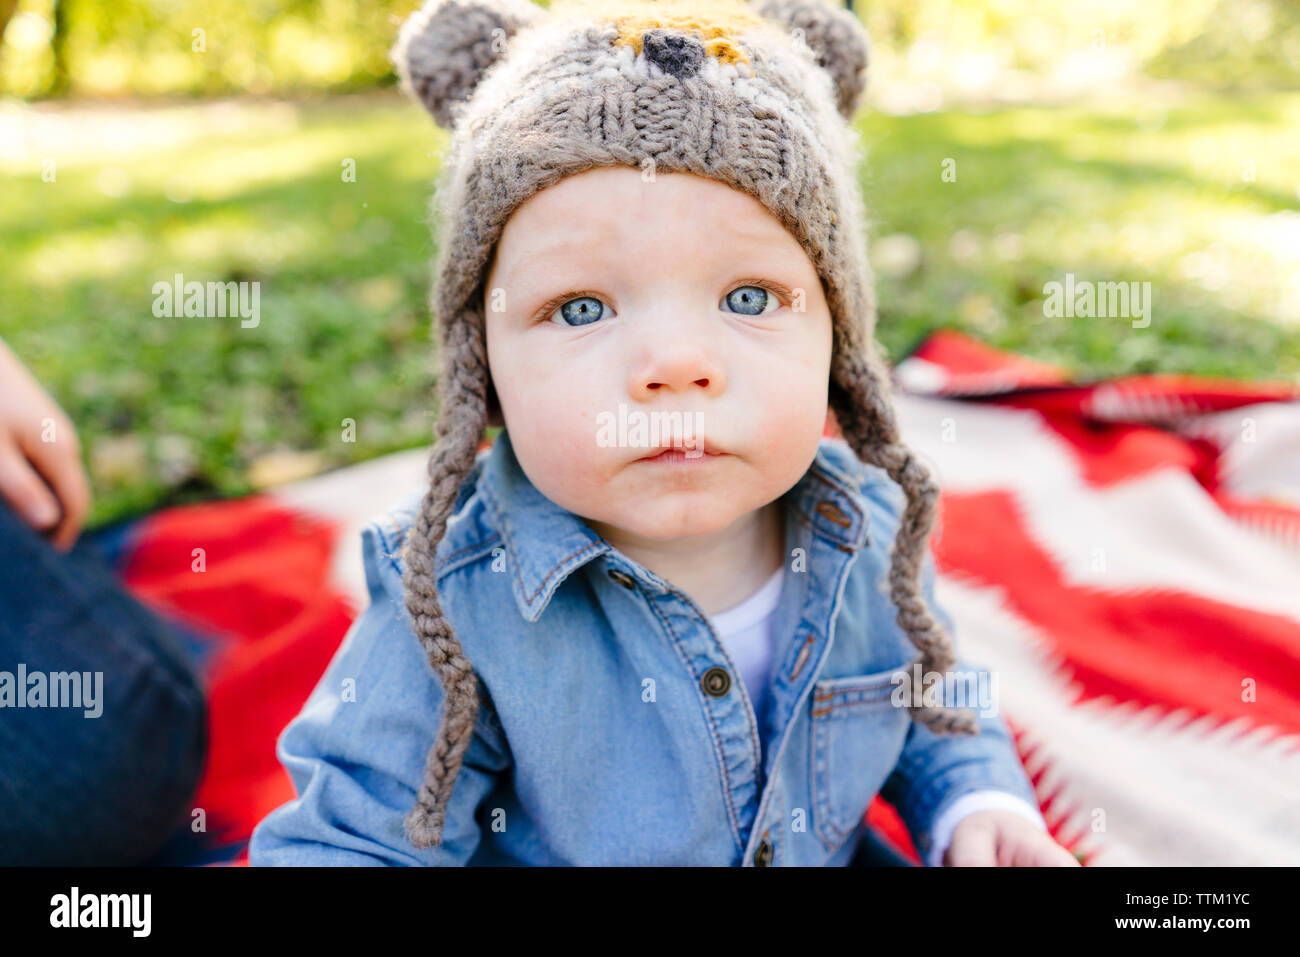 Closeup portrait of a baby boy wearing a hat Stock Photo